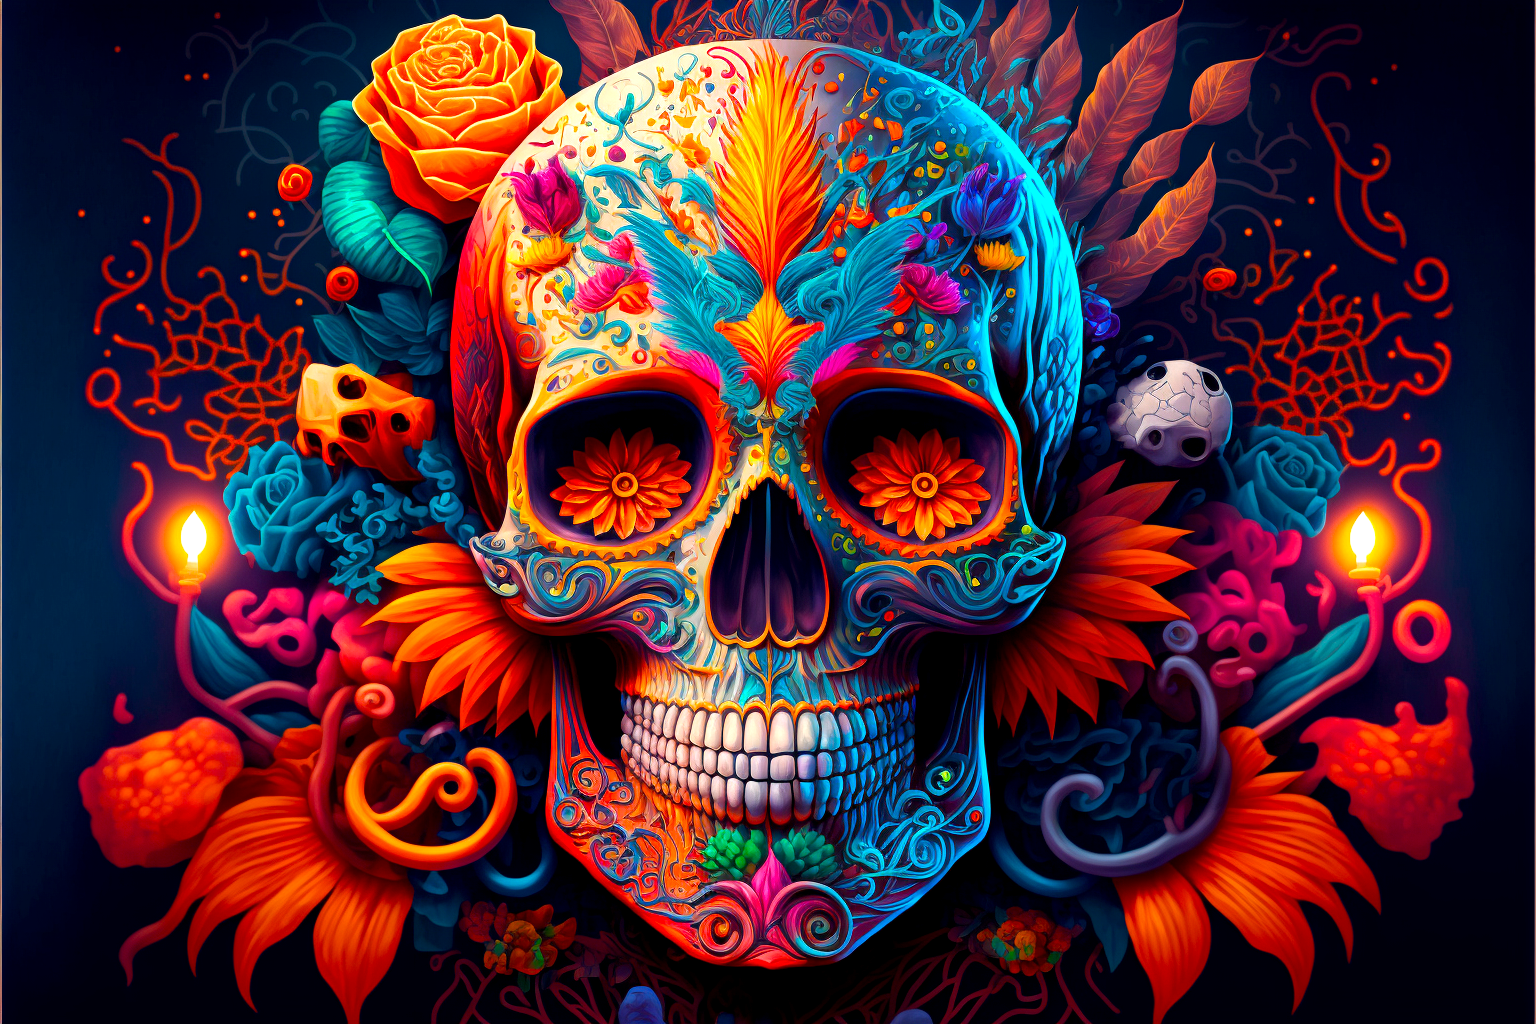 SOM18174_A_beautiful_colorful_full_image_of_Day_of_the_Dead_art_00d58ae7-48cb-4d09-965c-af9deb057bad.png